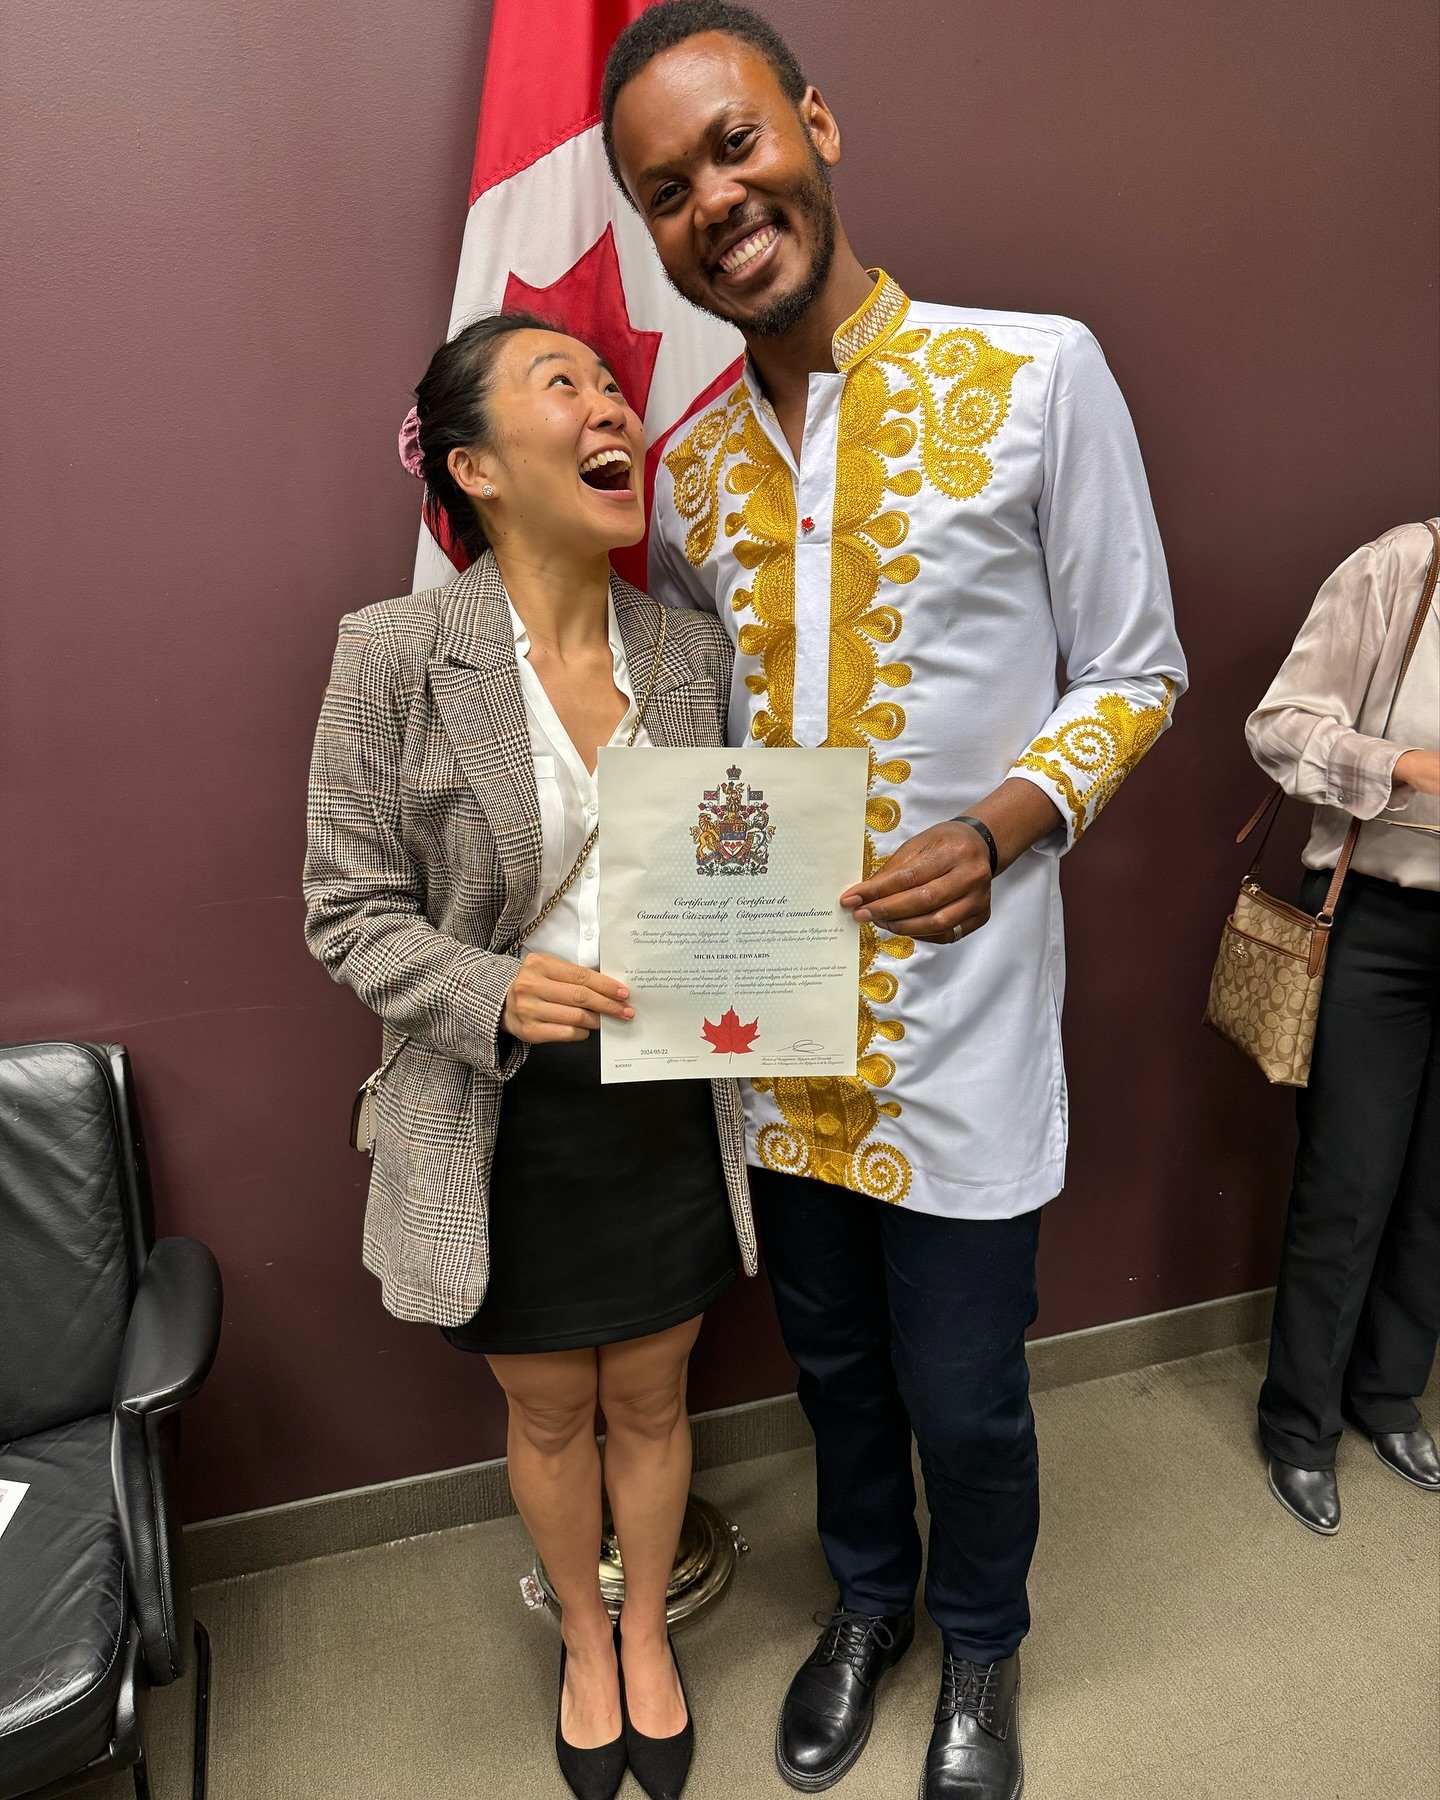 Micha became an official Canadian citizen the same day, Canadian Famous came out. What a miraculous moment in time, it was not planned! 
The judge insisted that everyone in the room affirm the oath. So, I too, got to experience the ceremony of becomi